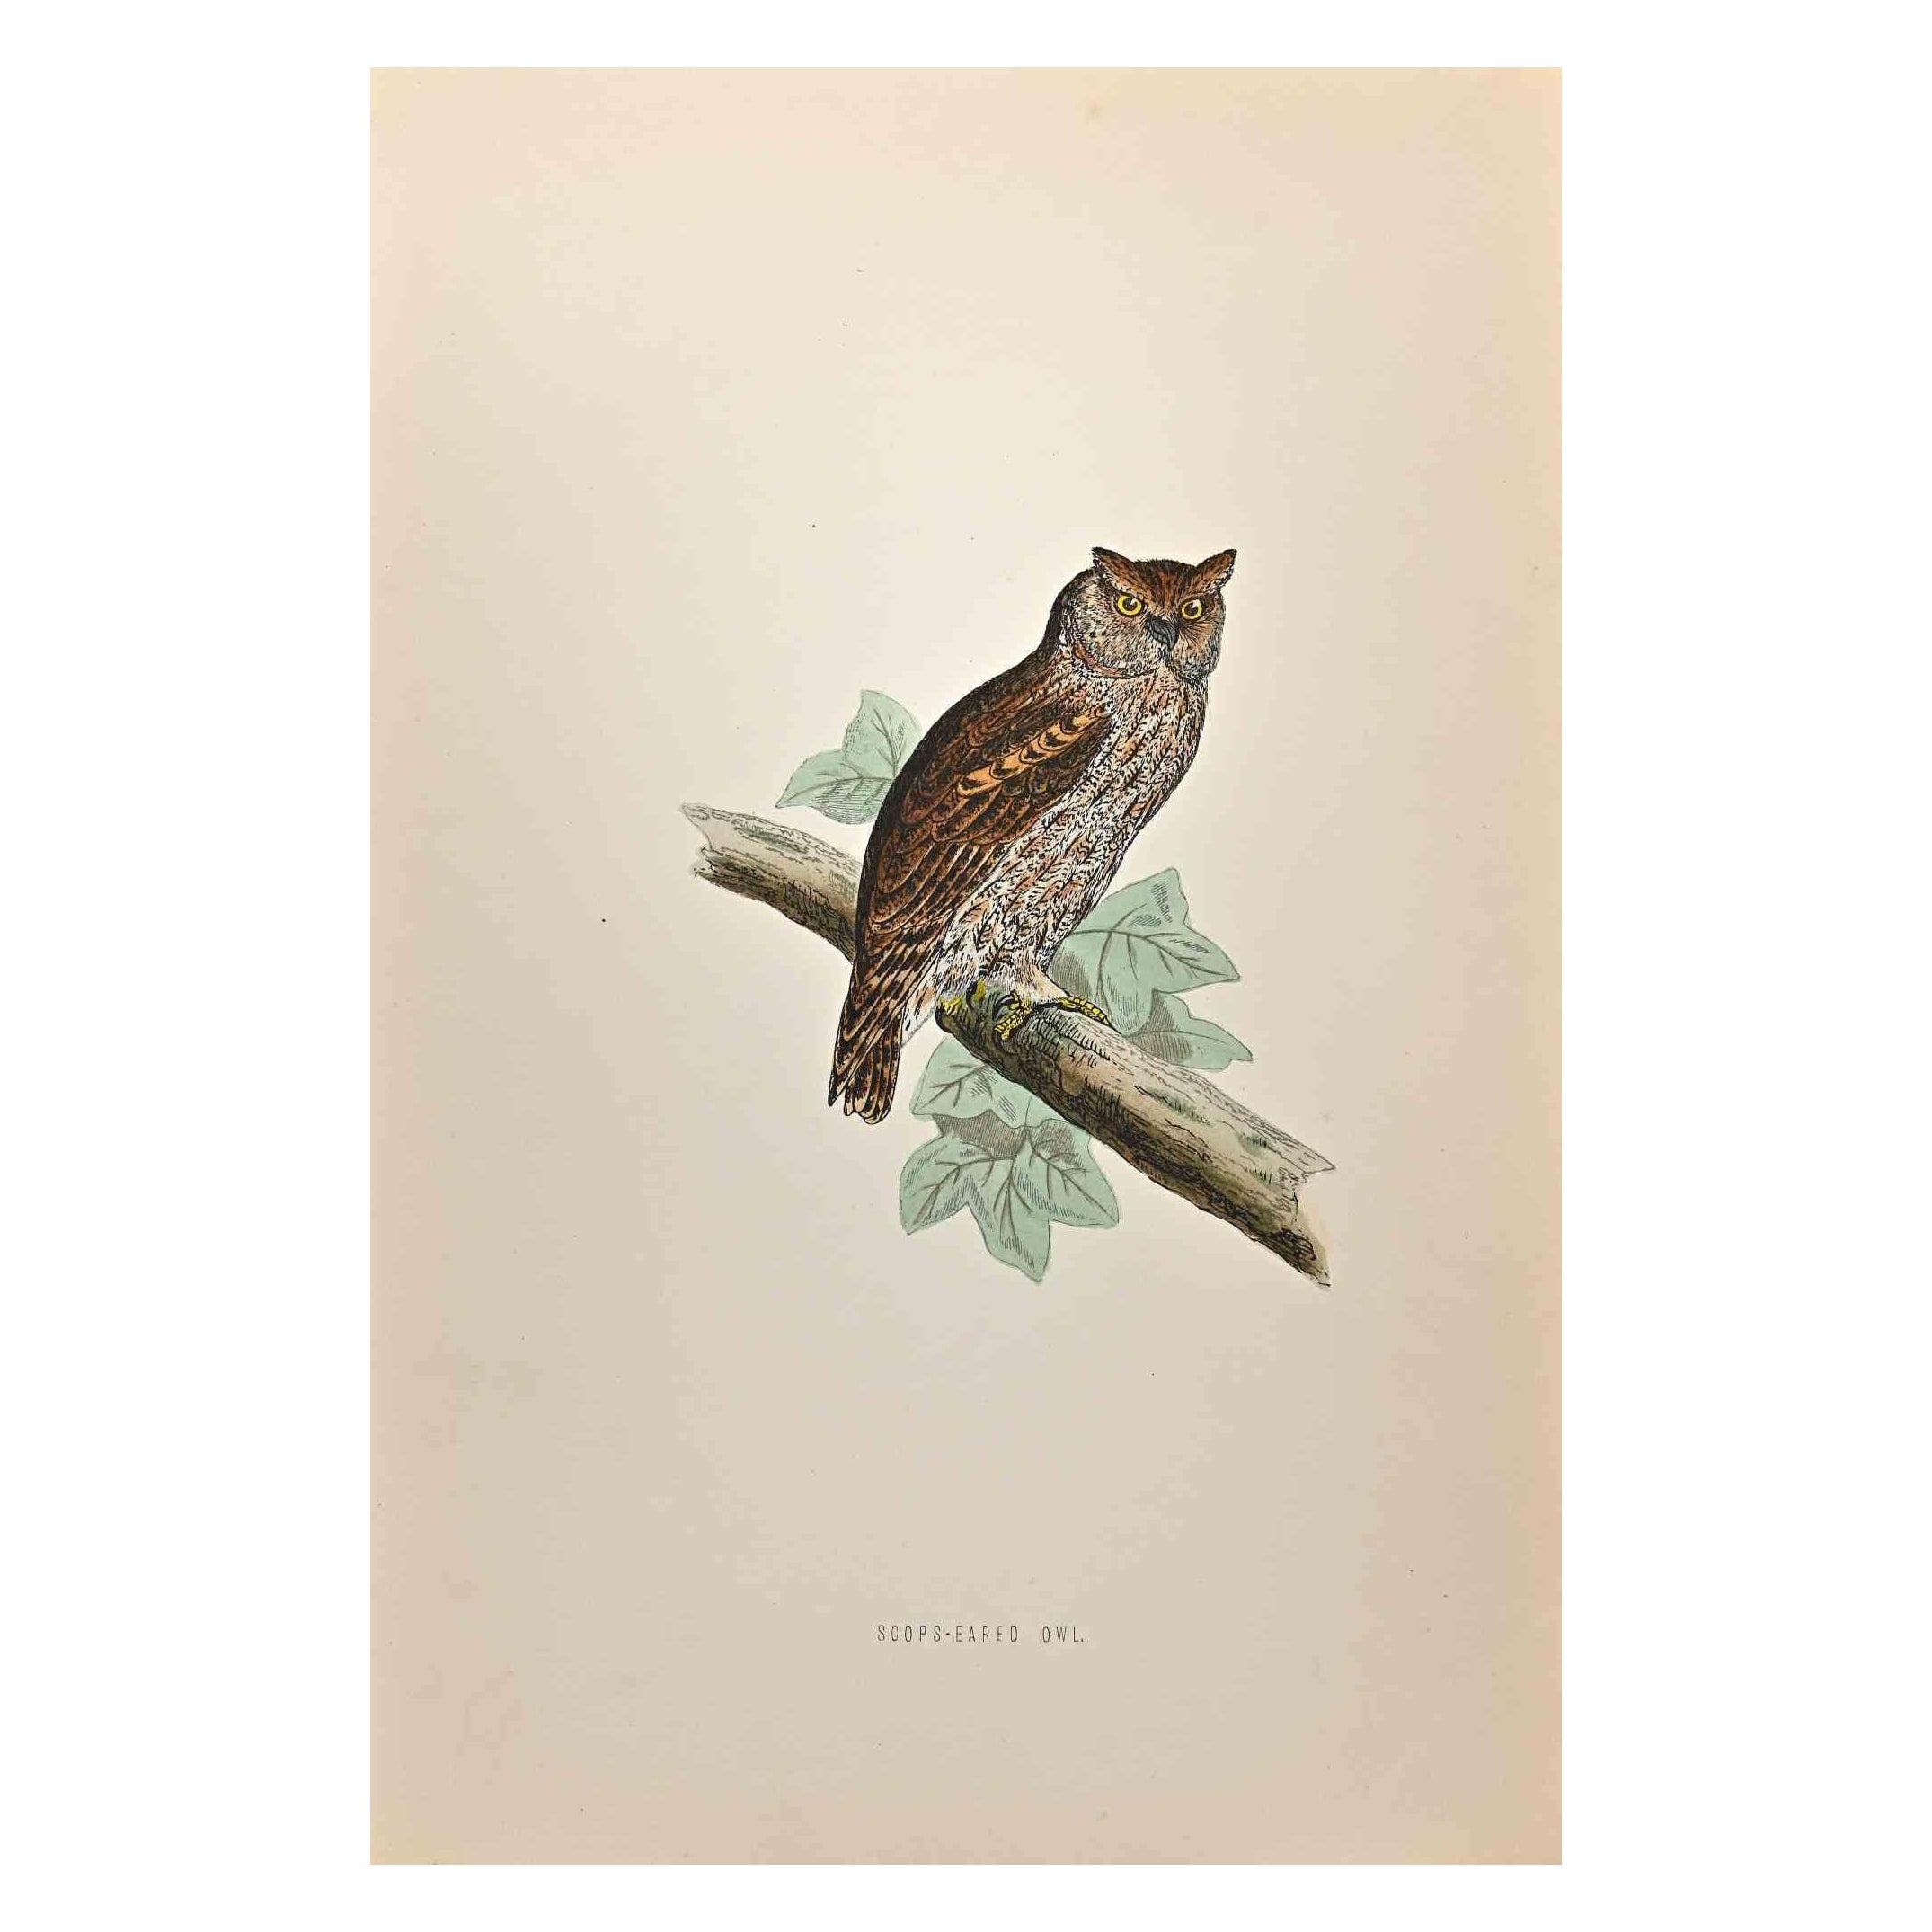 Scops-Eared Owl is a modern artwork realized in 1870 by the British artist Alexander Francis Lydon (1836-1917).

Woodcut print on ivory-colored paper.

Hand-colored, published by London, Bell & Sons, 1870.  

The name of the bird is printed on the